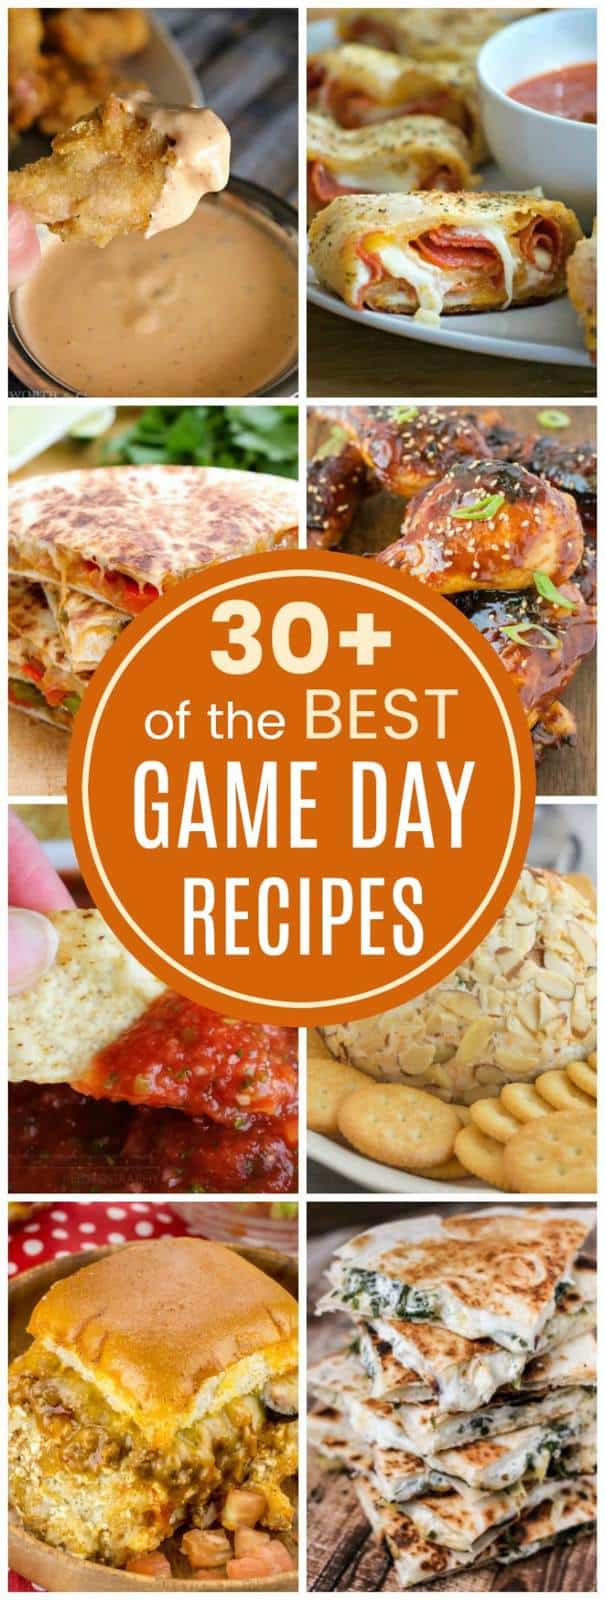 Over 30 of the Best Game Day Recipes - Cupcakes & Kale Chips